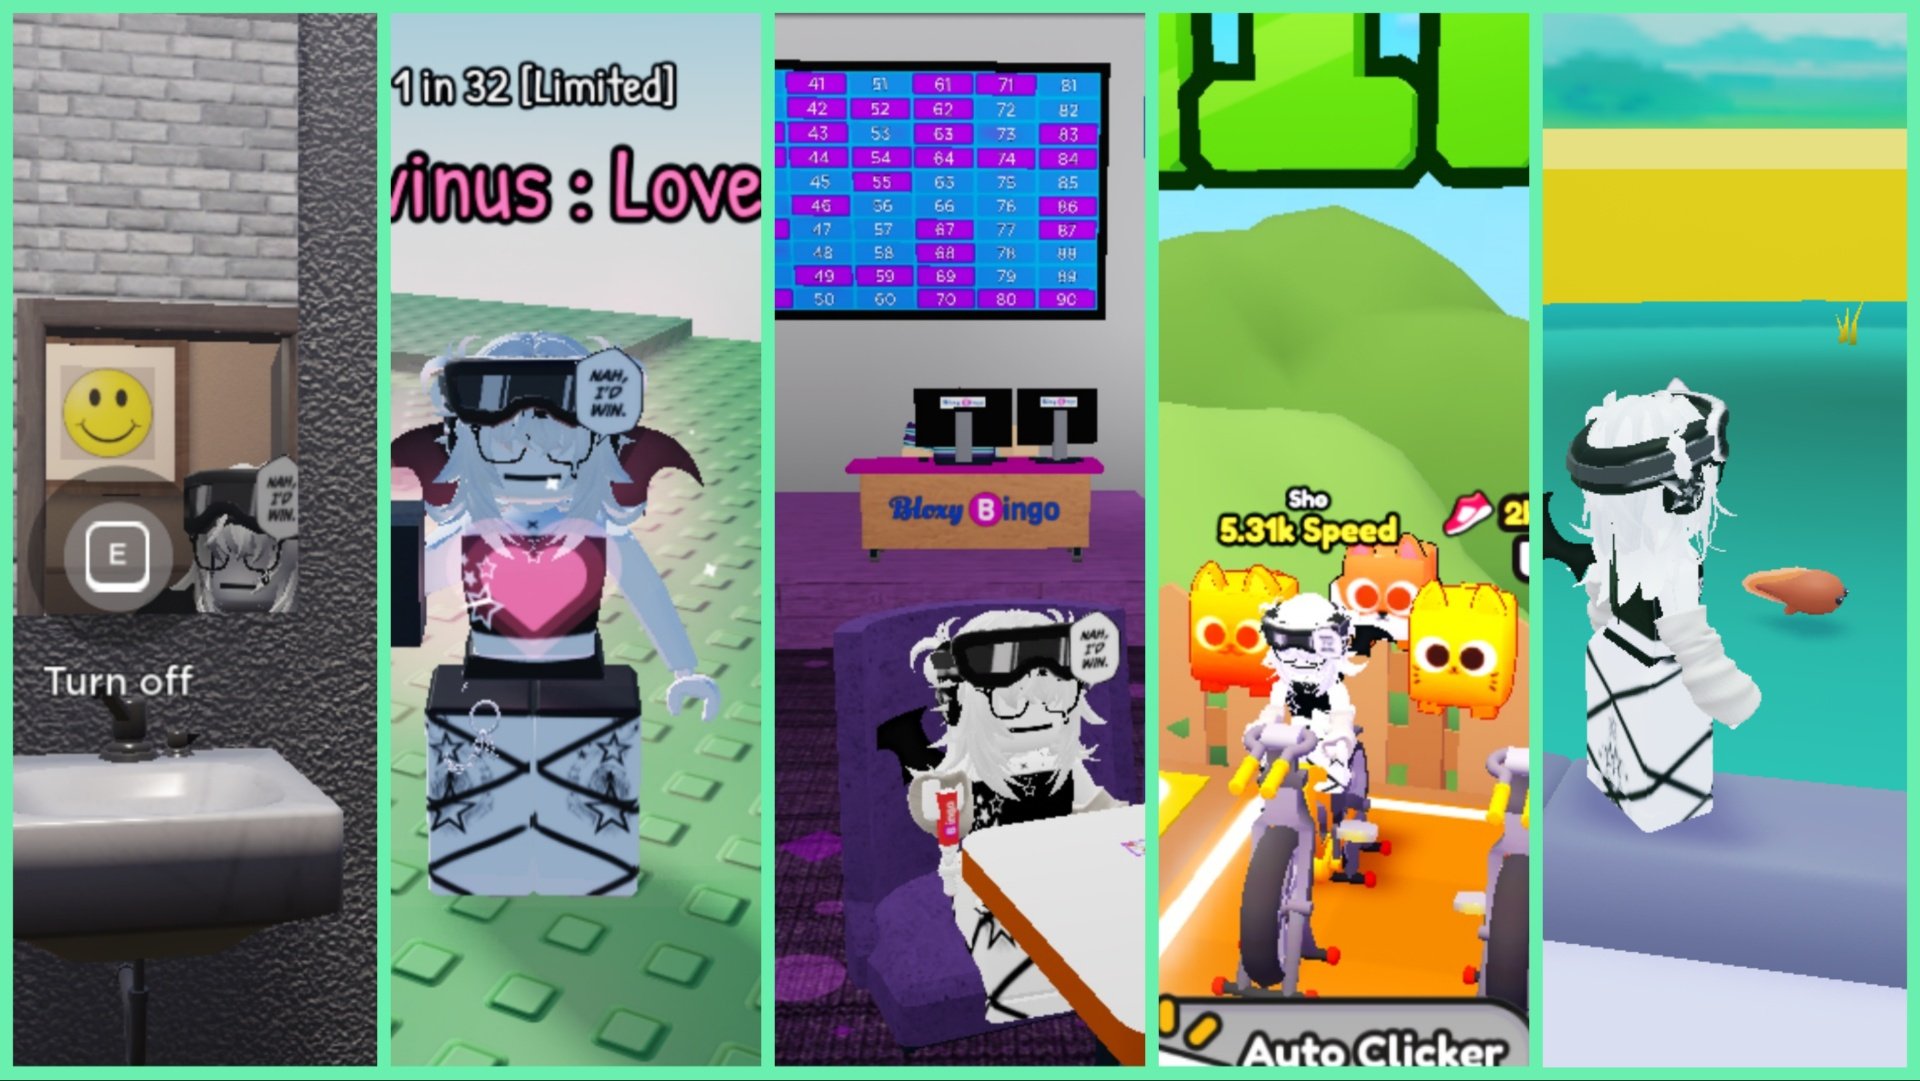 5-way collage showing my avatar in different games from my weekly featured games